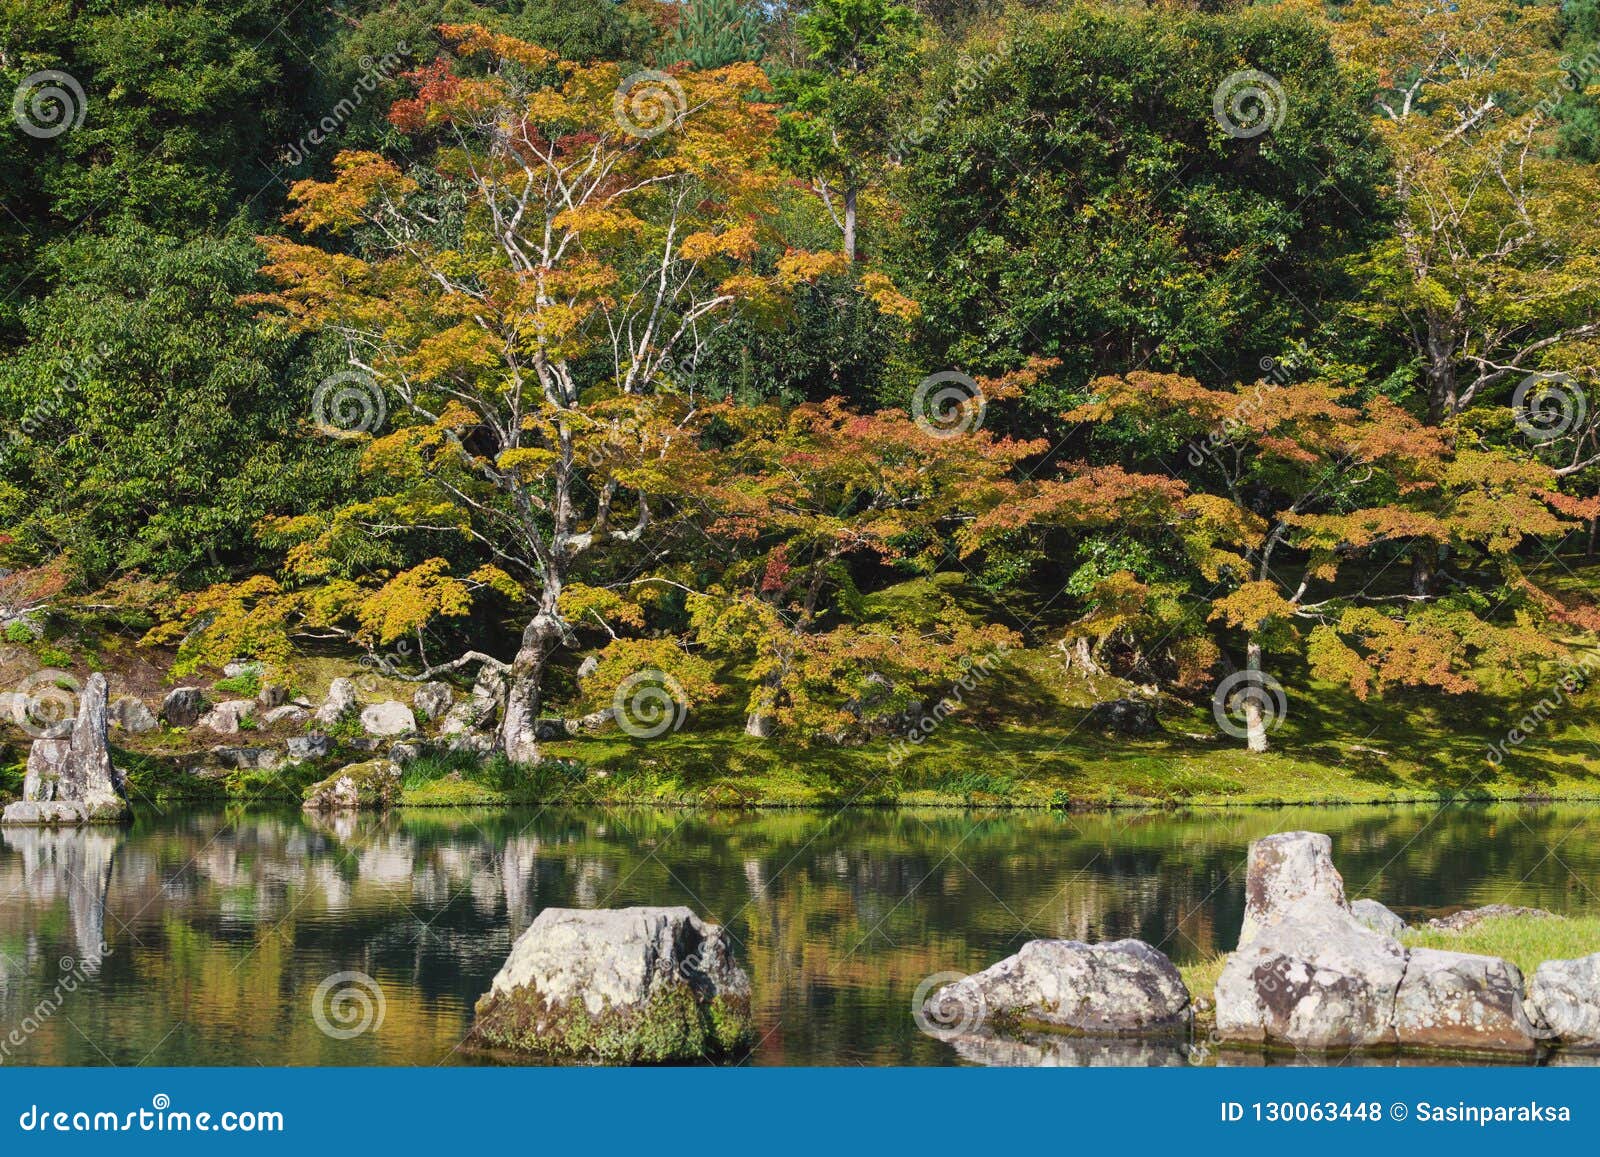 autumn`s coming, colourful trees season changed in ginkaku-ji temple, famous travel destination in kyoto japan